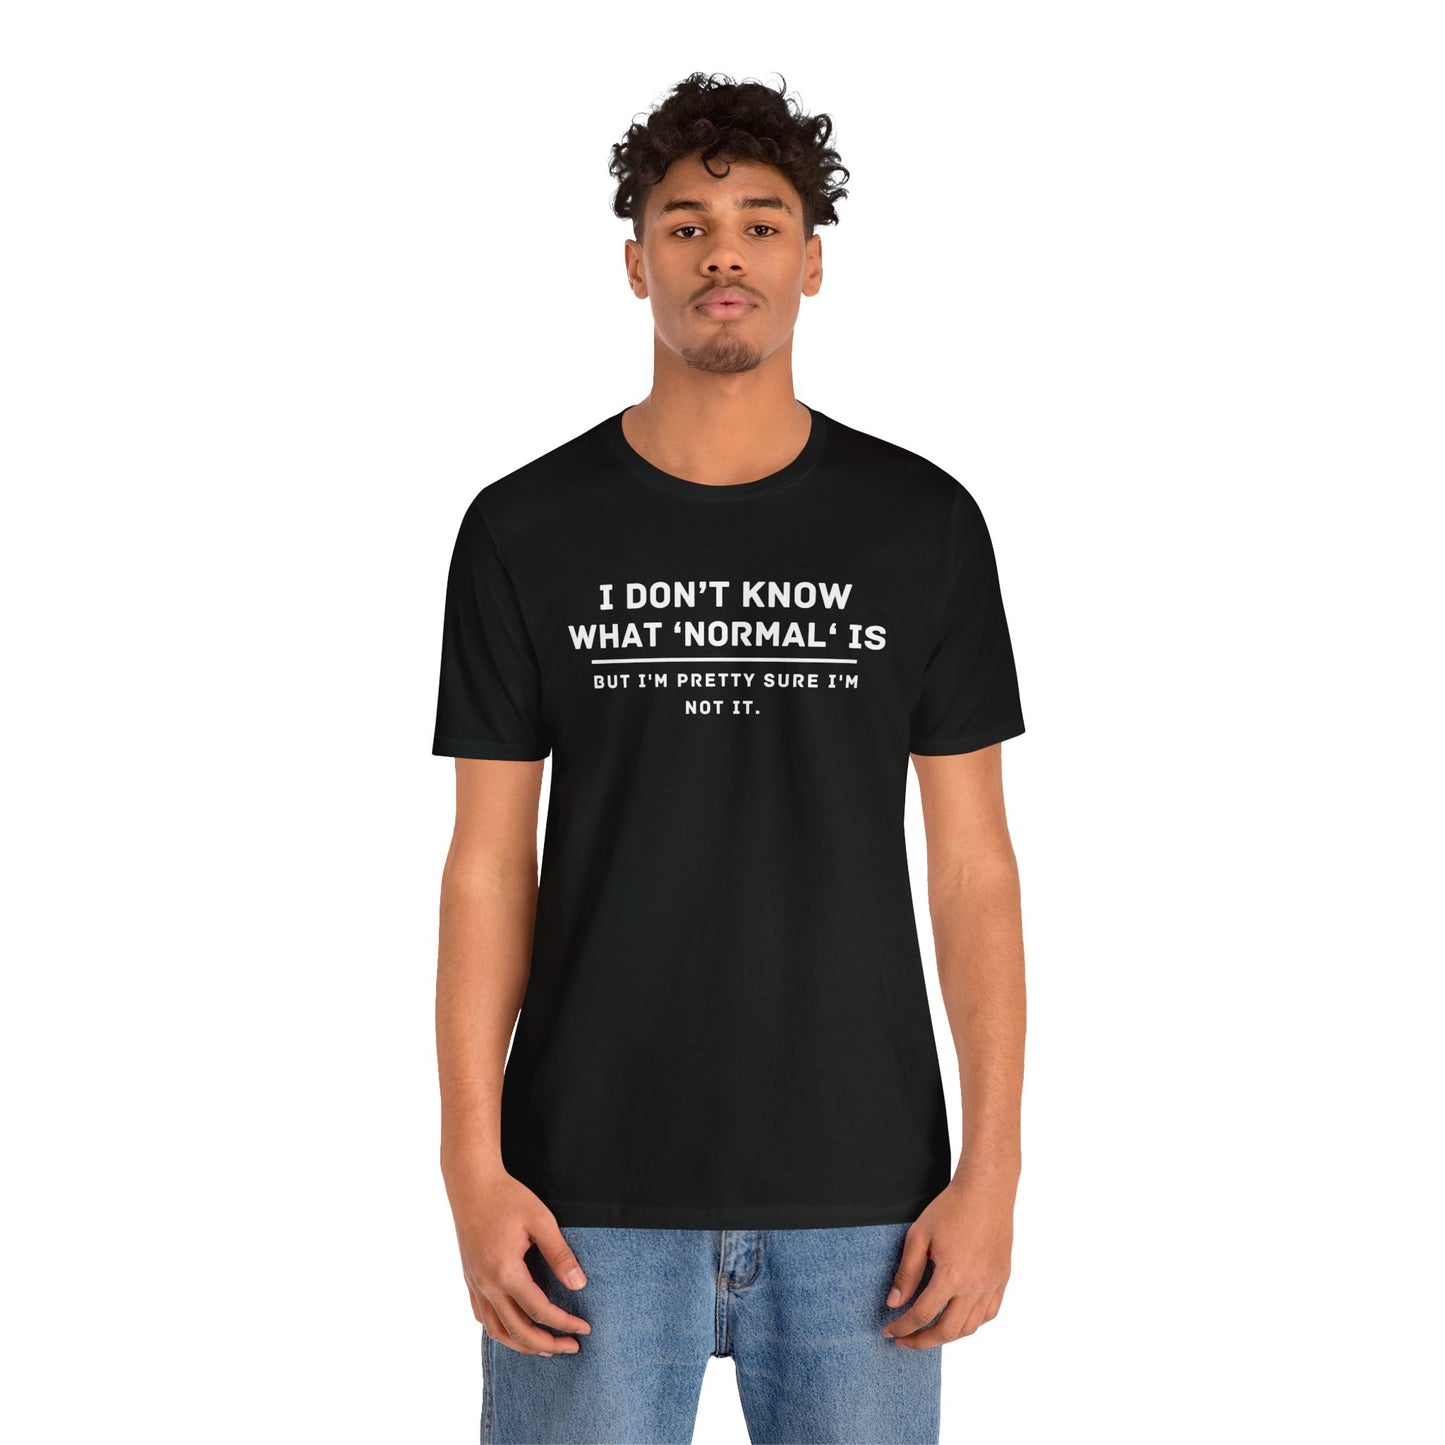 Embrace Uniqueness T-Shirt: 'Normal' Redefined – Stand Out & Express Yourself